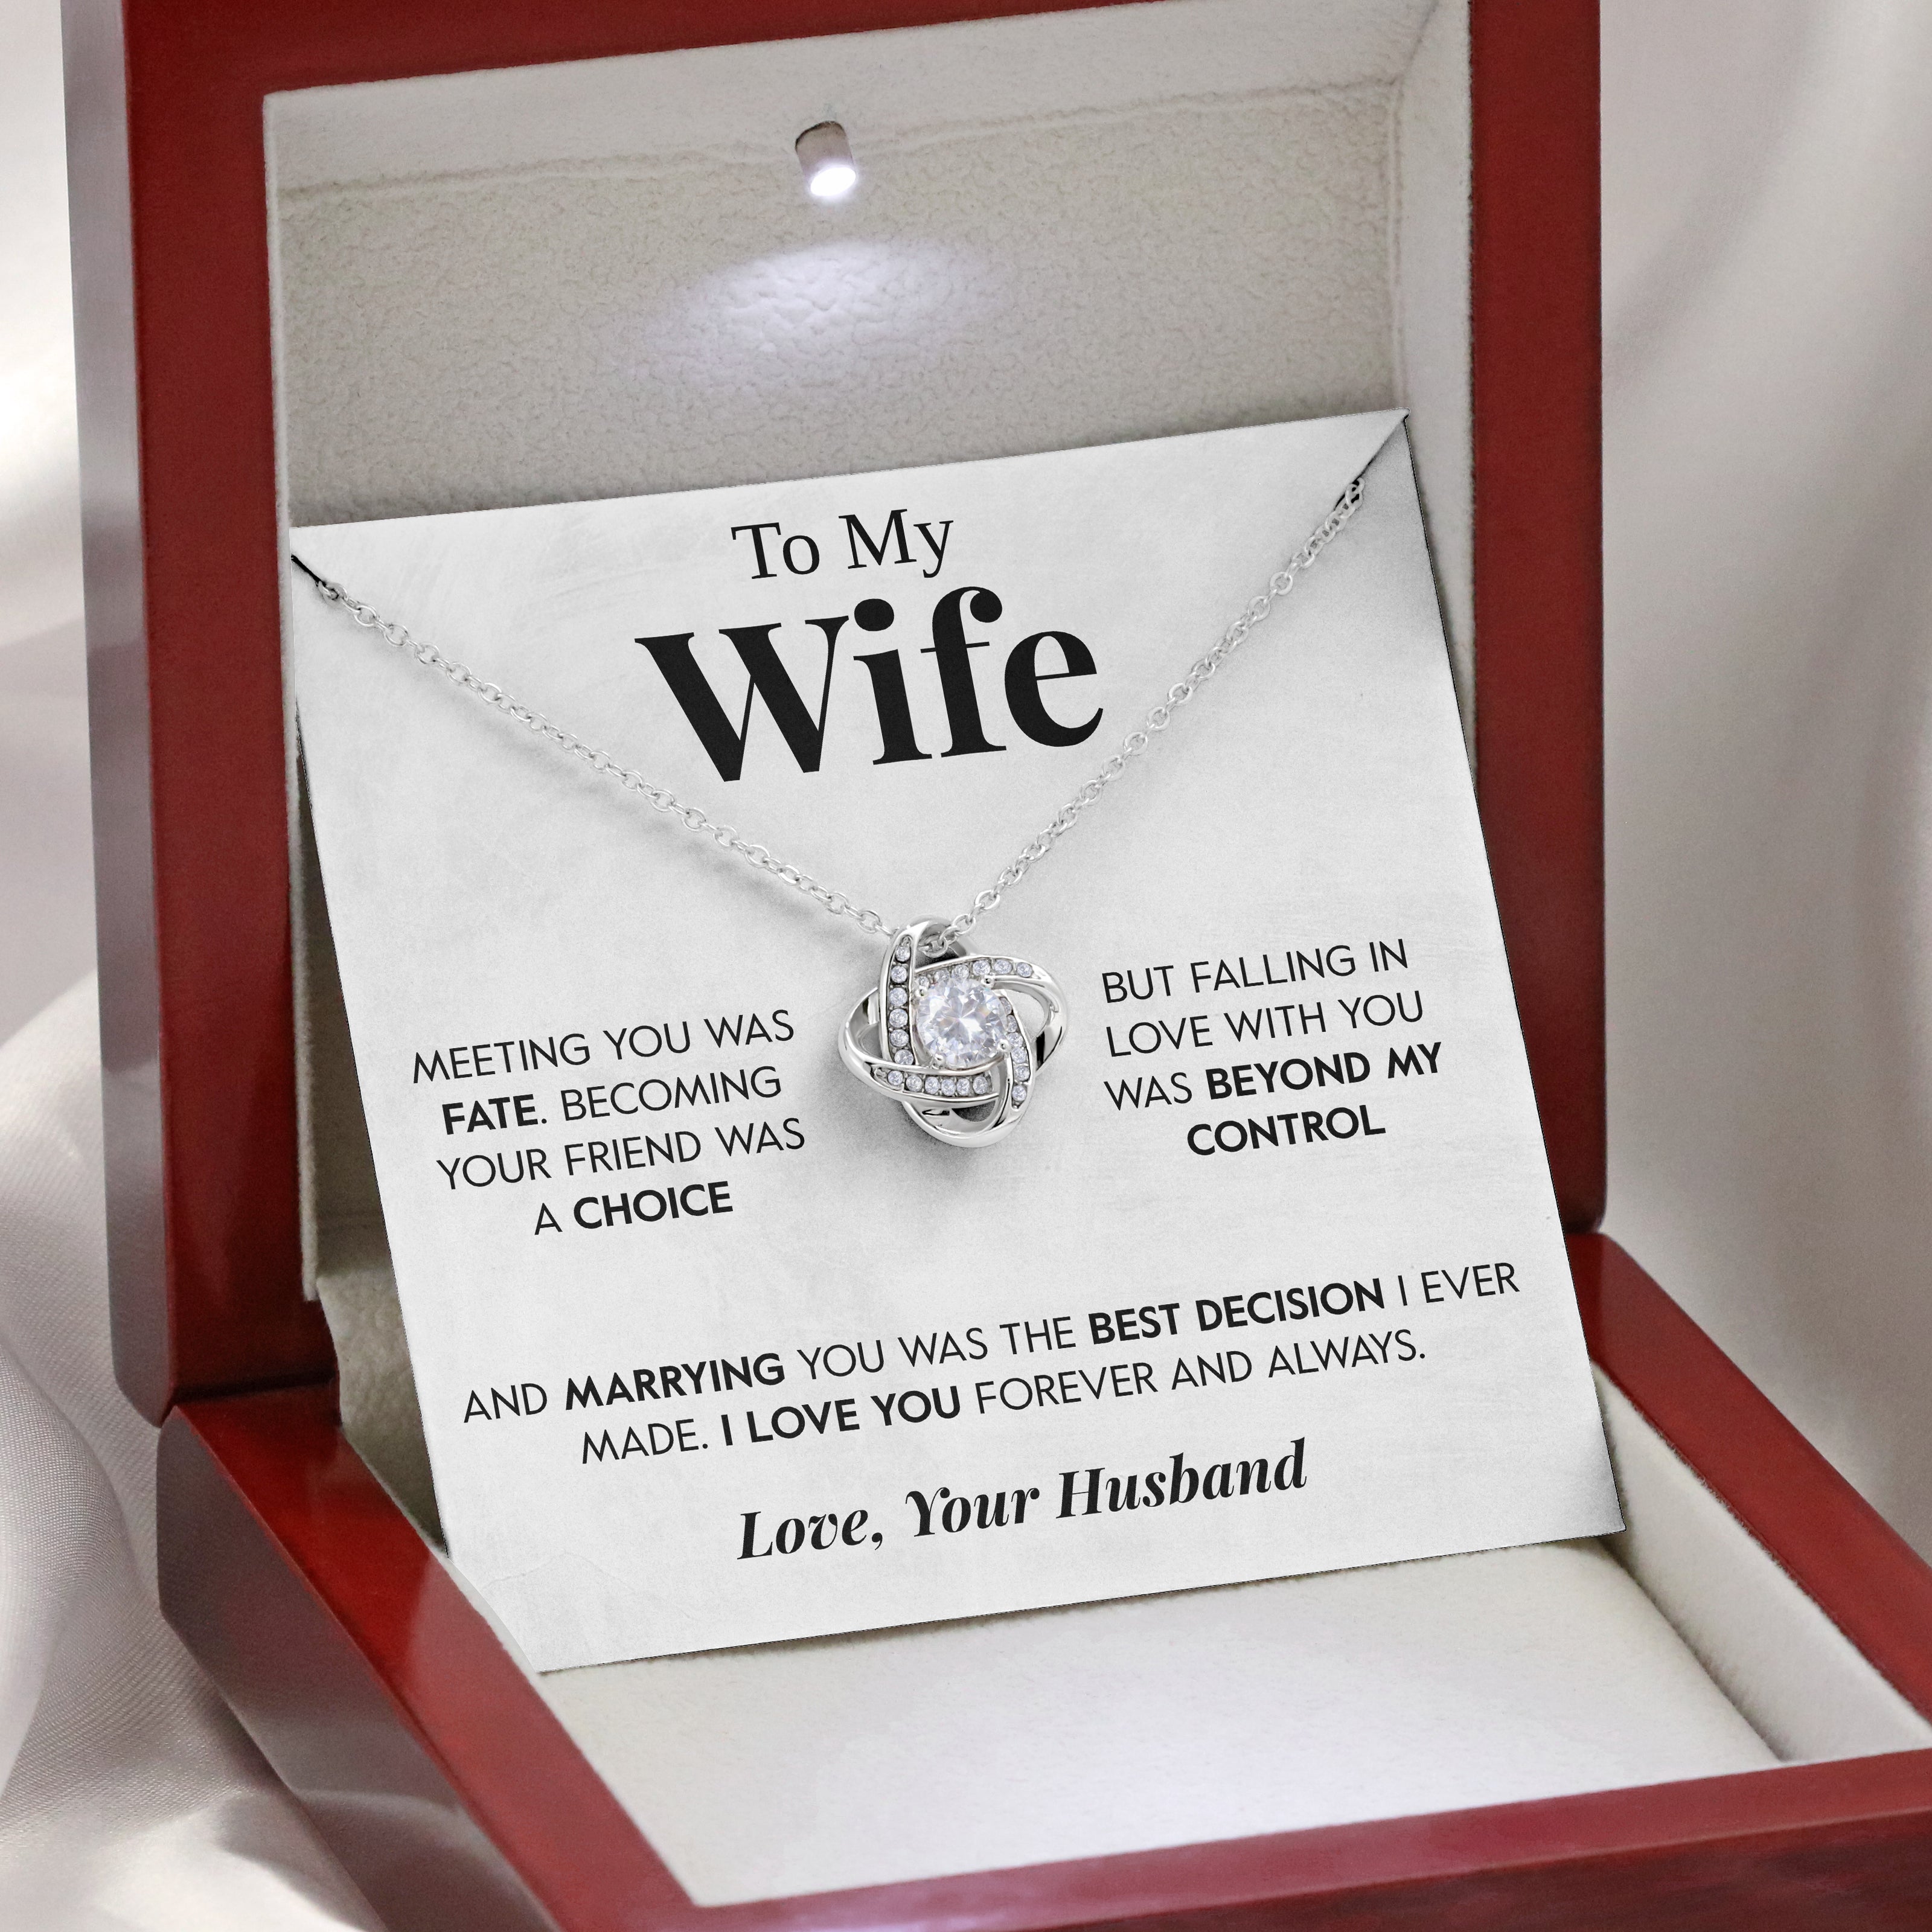 To My Wife | "The Best Decision" | Love Knot Necklace